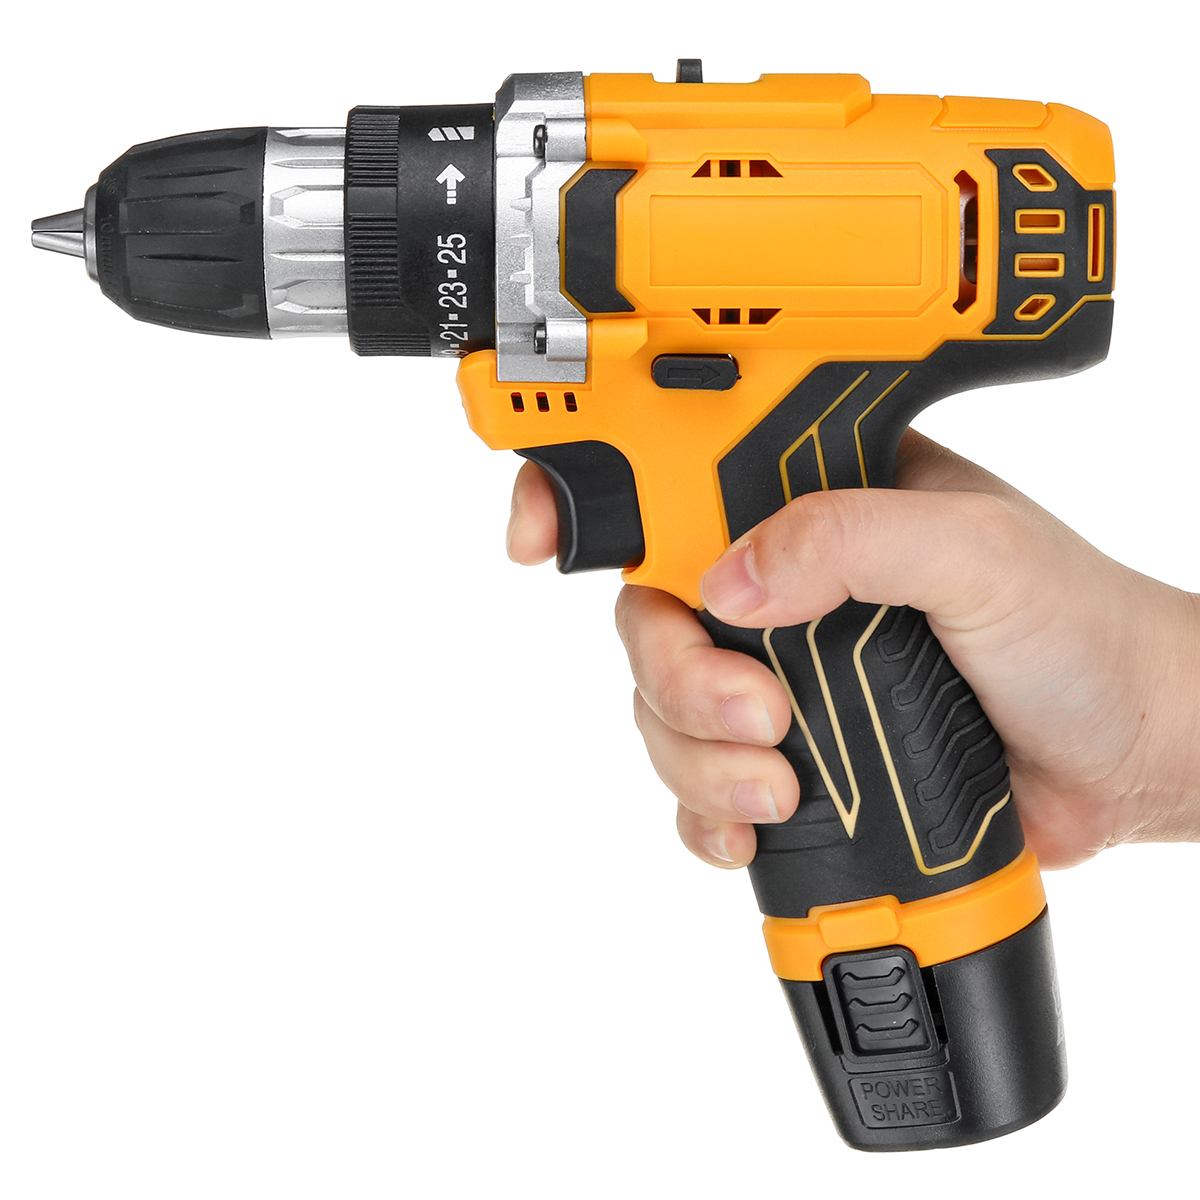 121821V-251-Torque-2-Speed-Cordless-Electric-Drill-Screwdriver-W-LED-Light-1733758-9